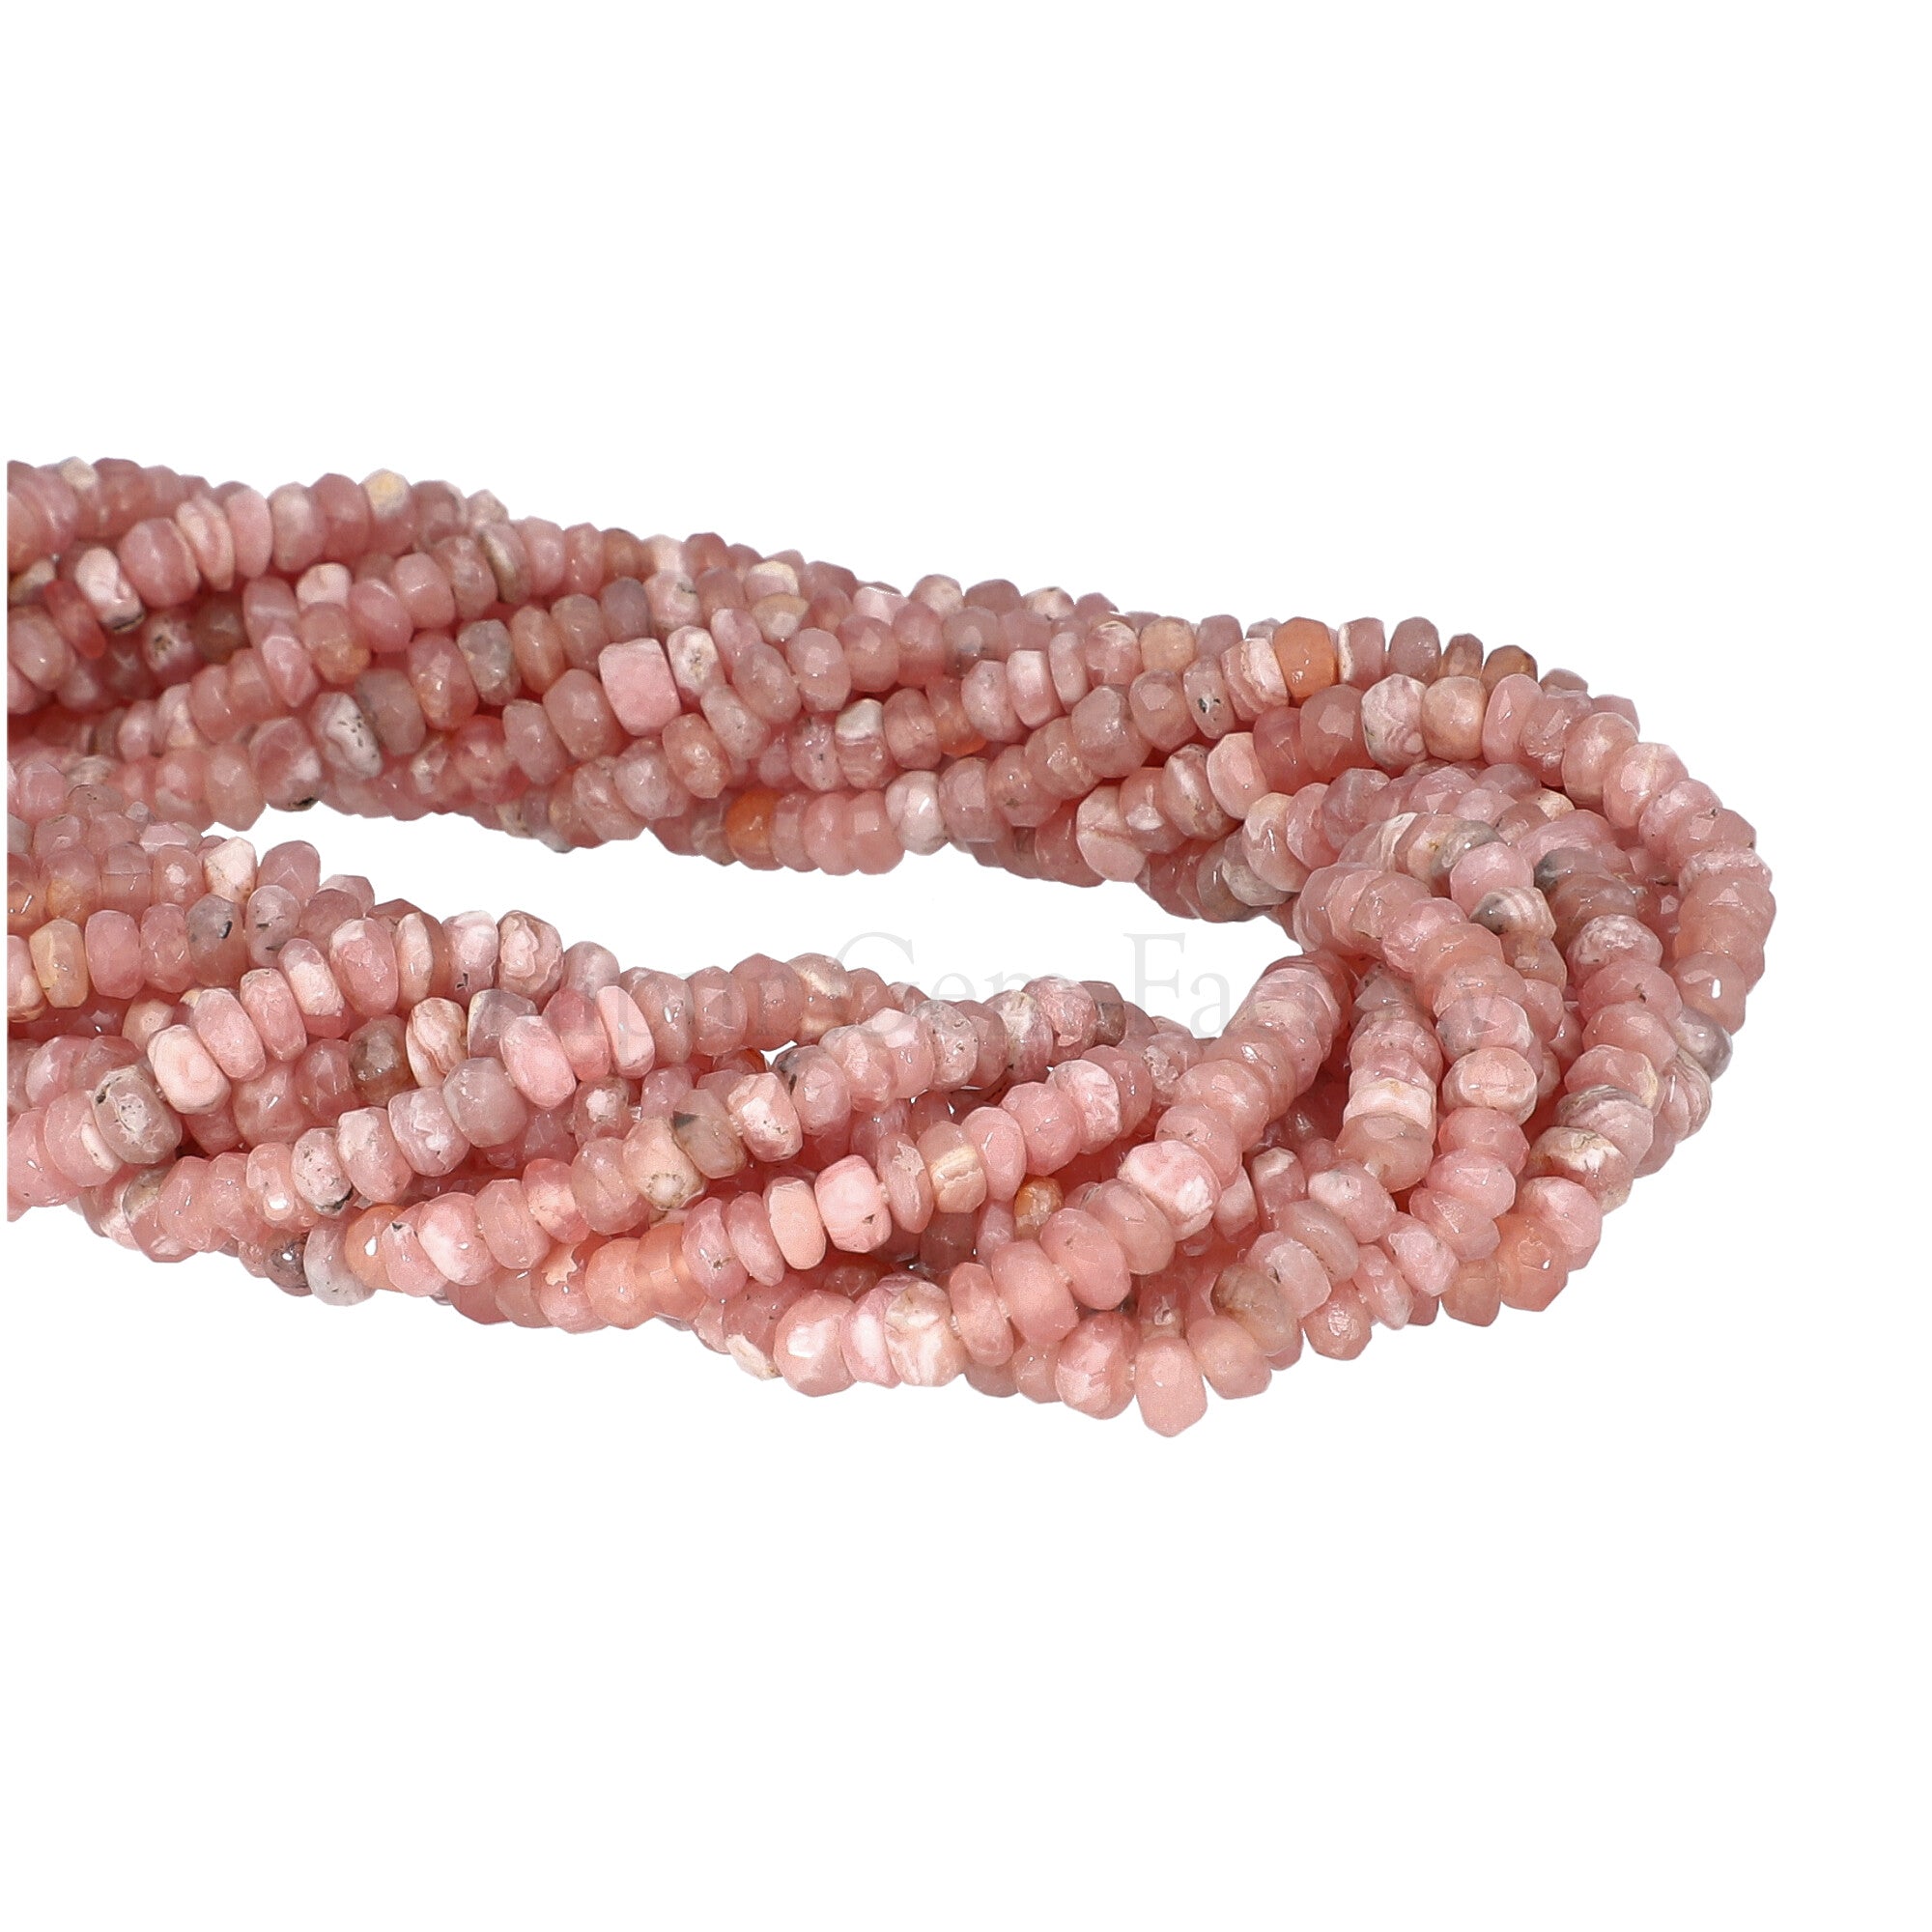 Rhodochrosite 4 To 5 MM Faceted Rondelle Shape Beads Strand